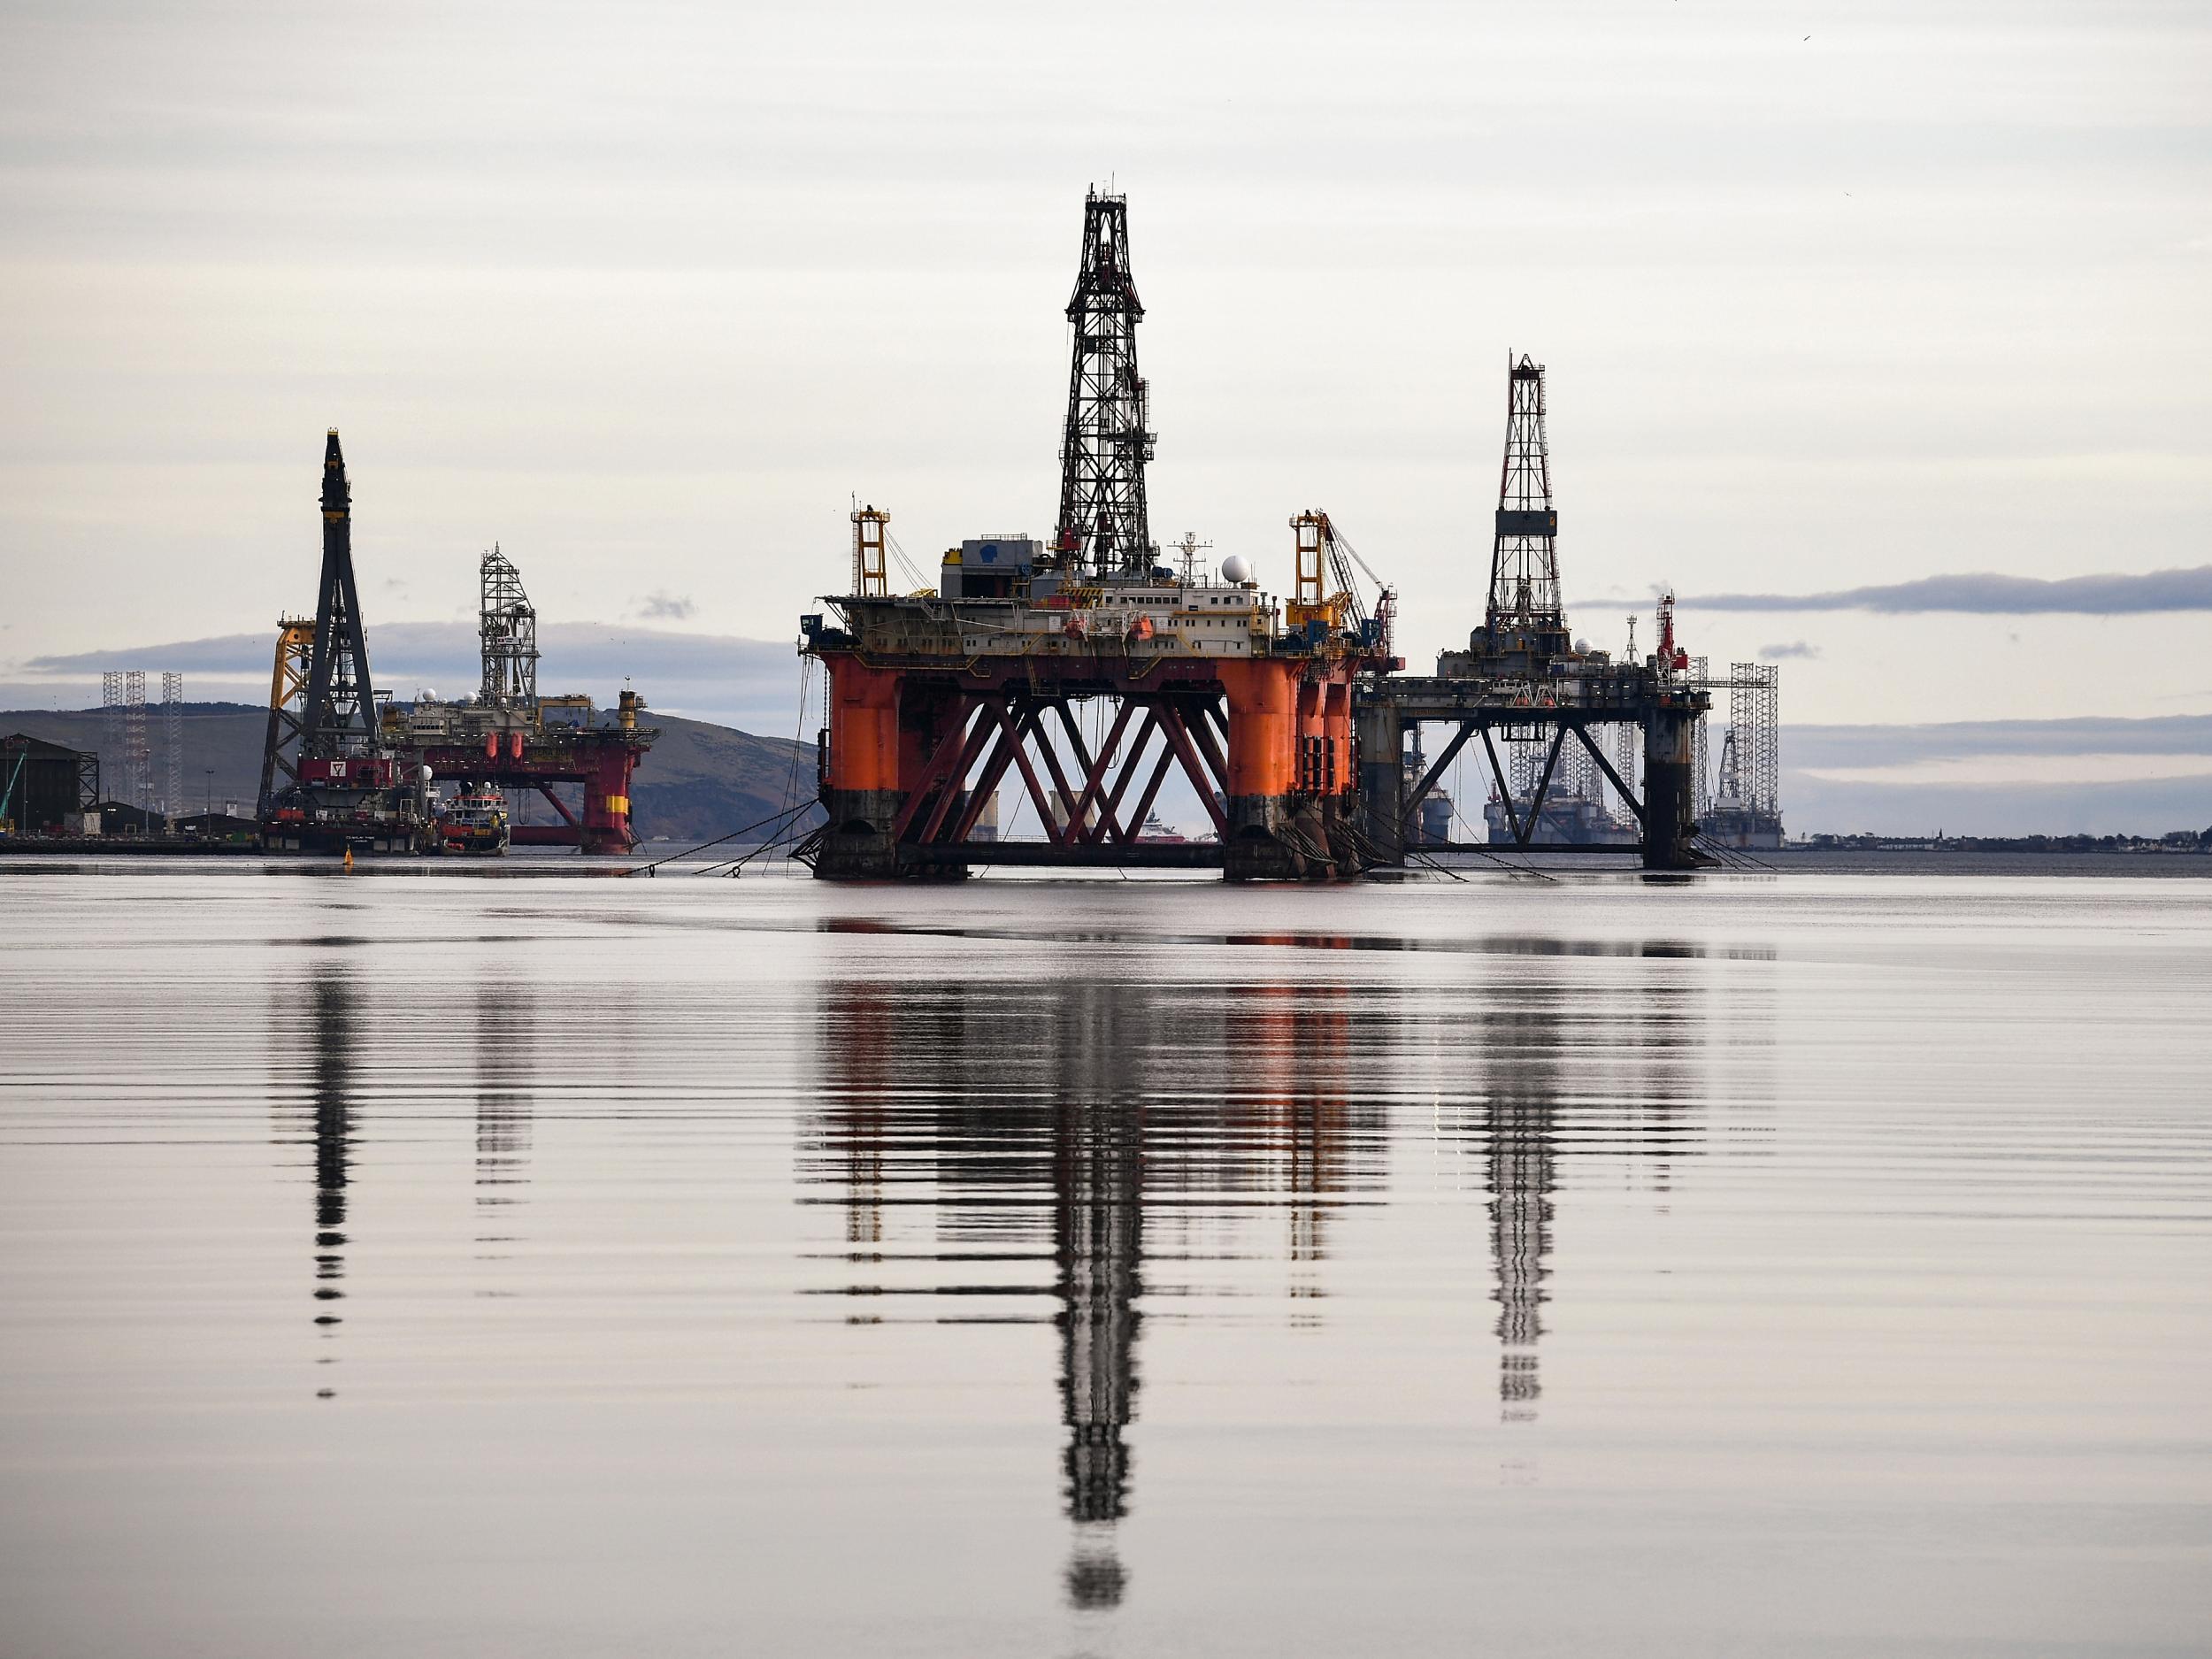 Oil rigs awaiting decommissioning in the Cromarty Firth off the coast of Scotland